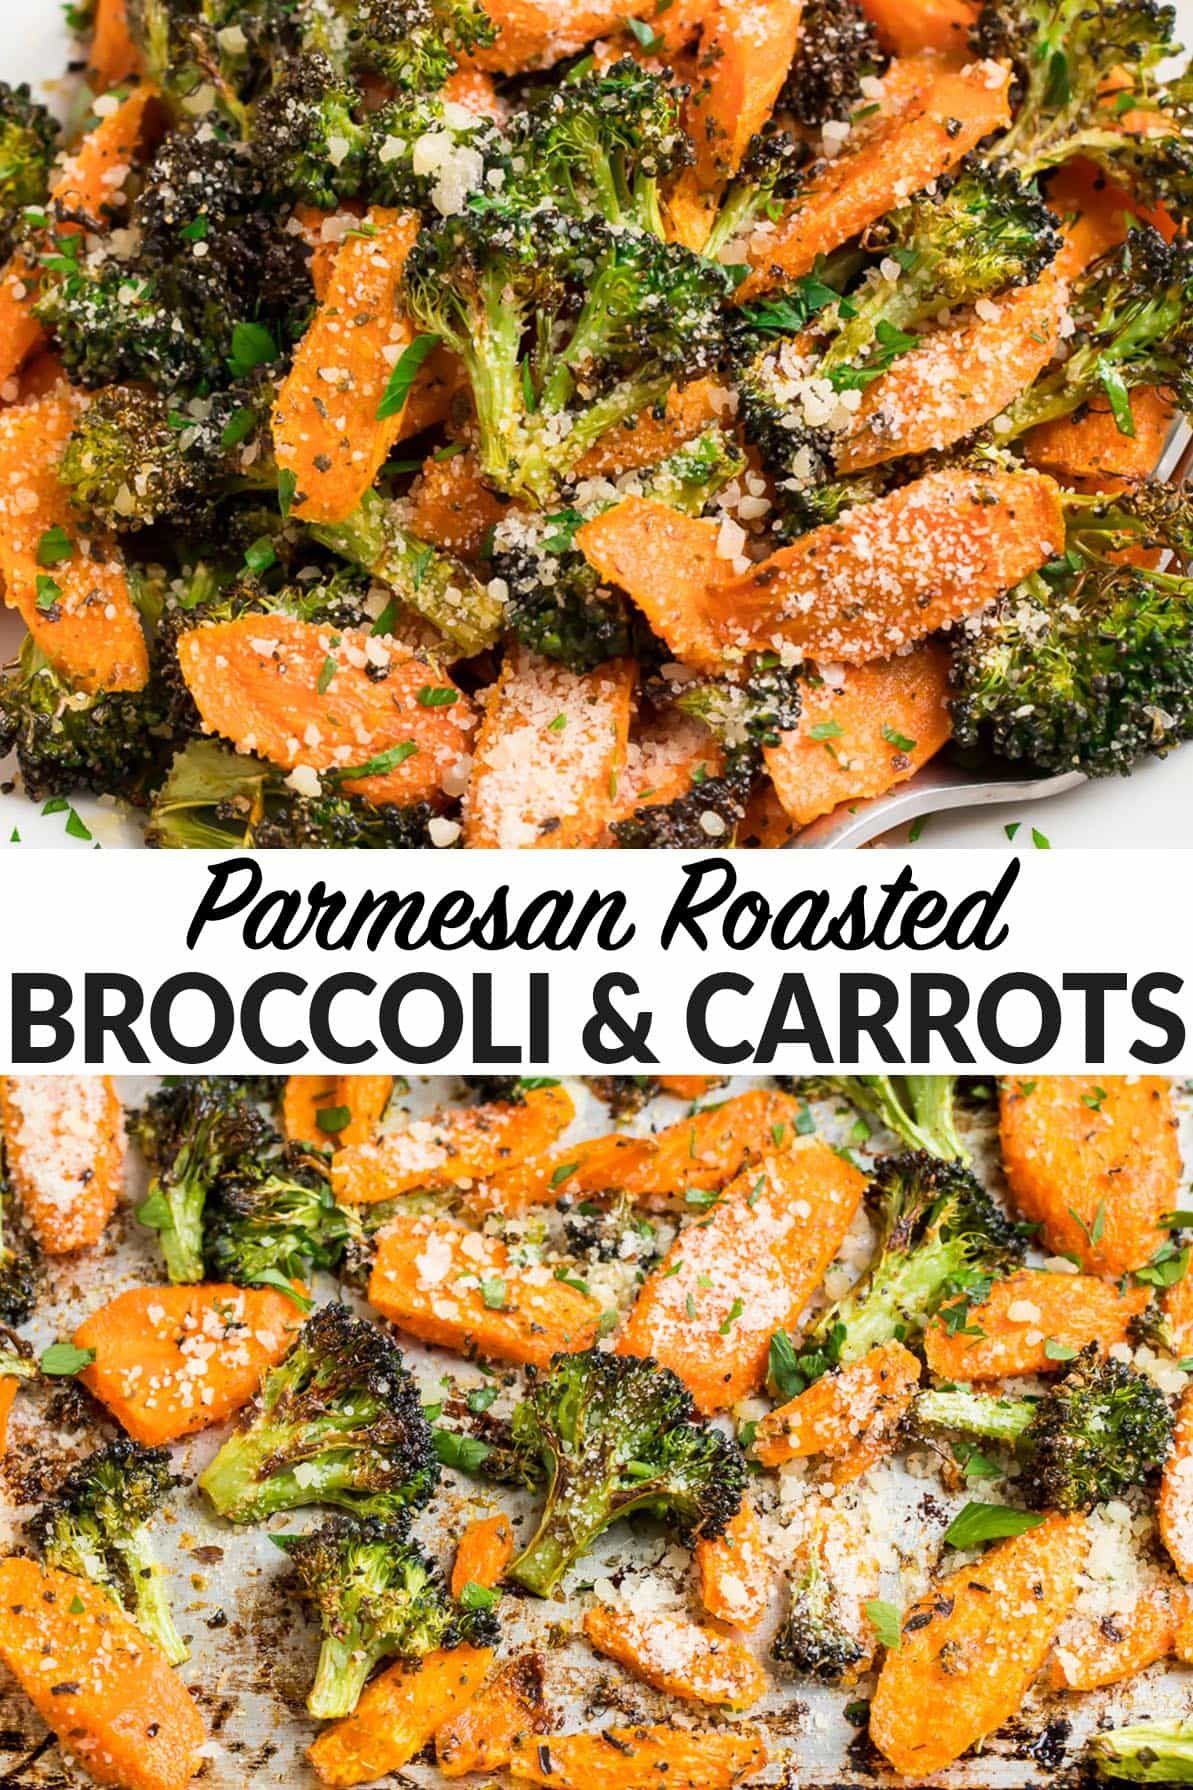 Roasted Broccoli and Carrots -   19 healthy recipes Sides veggies ideas